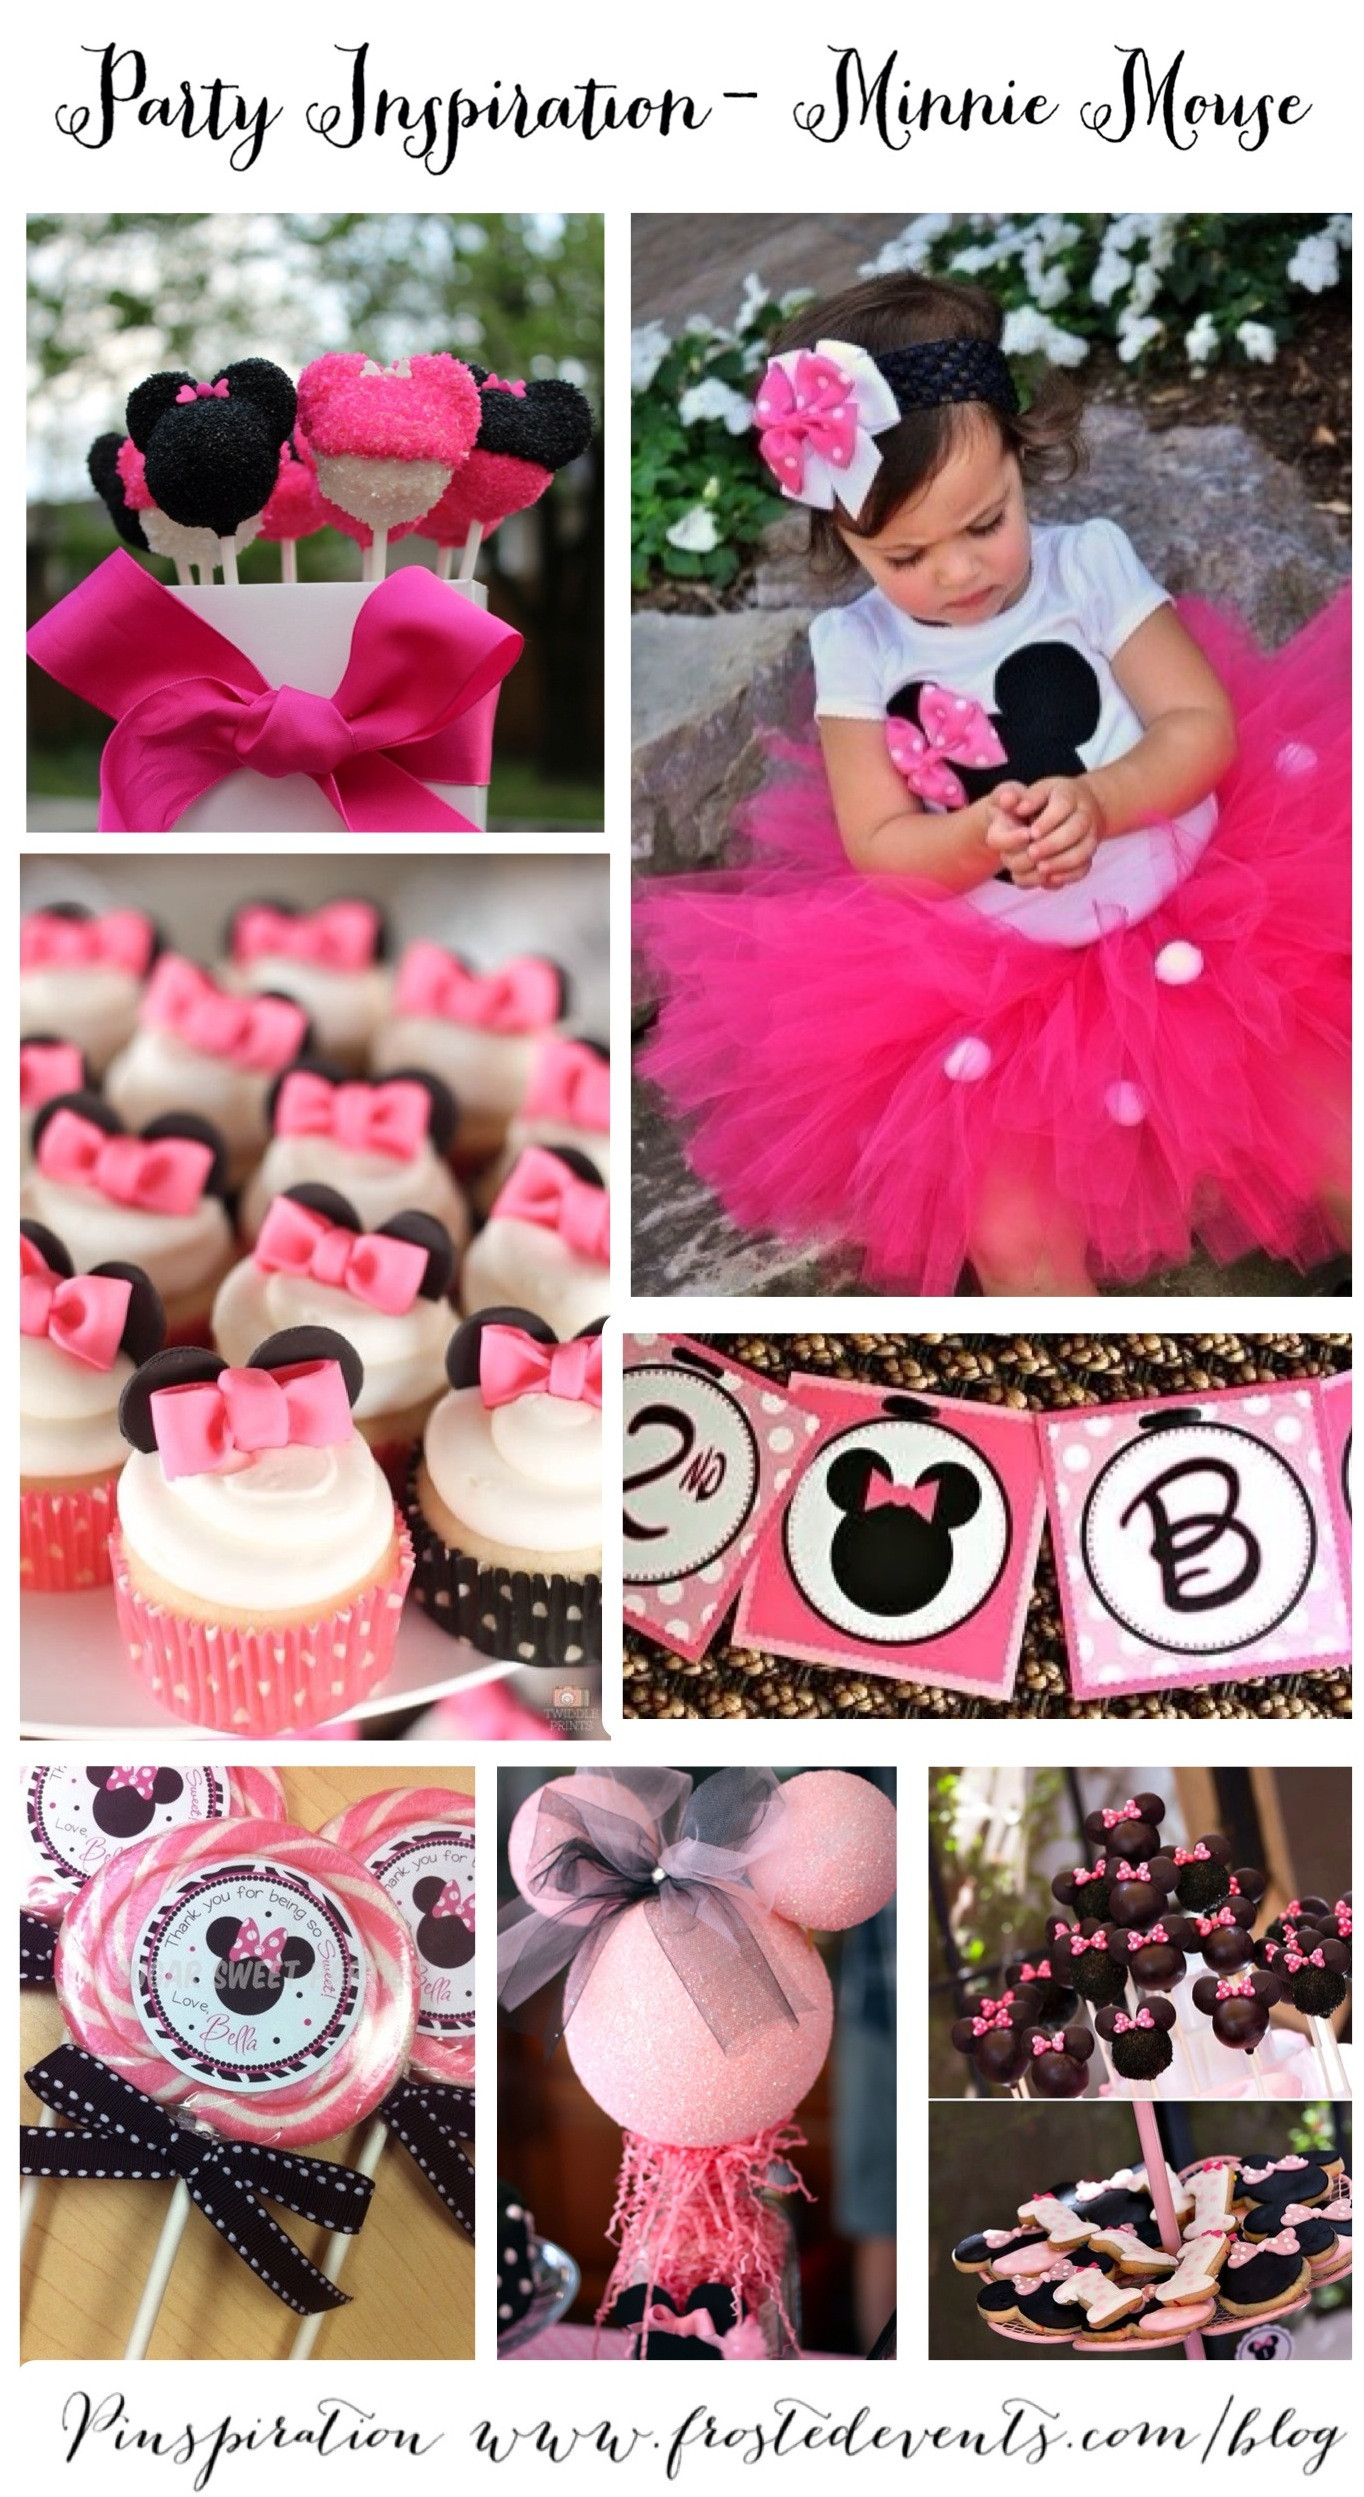 Ideas For A Minnie Mouse Birthday Party
 minnie mouse party ideas